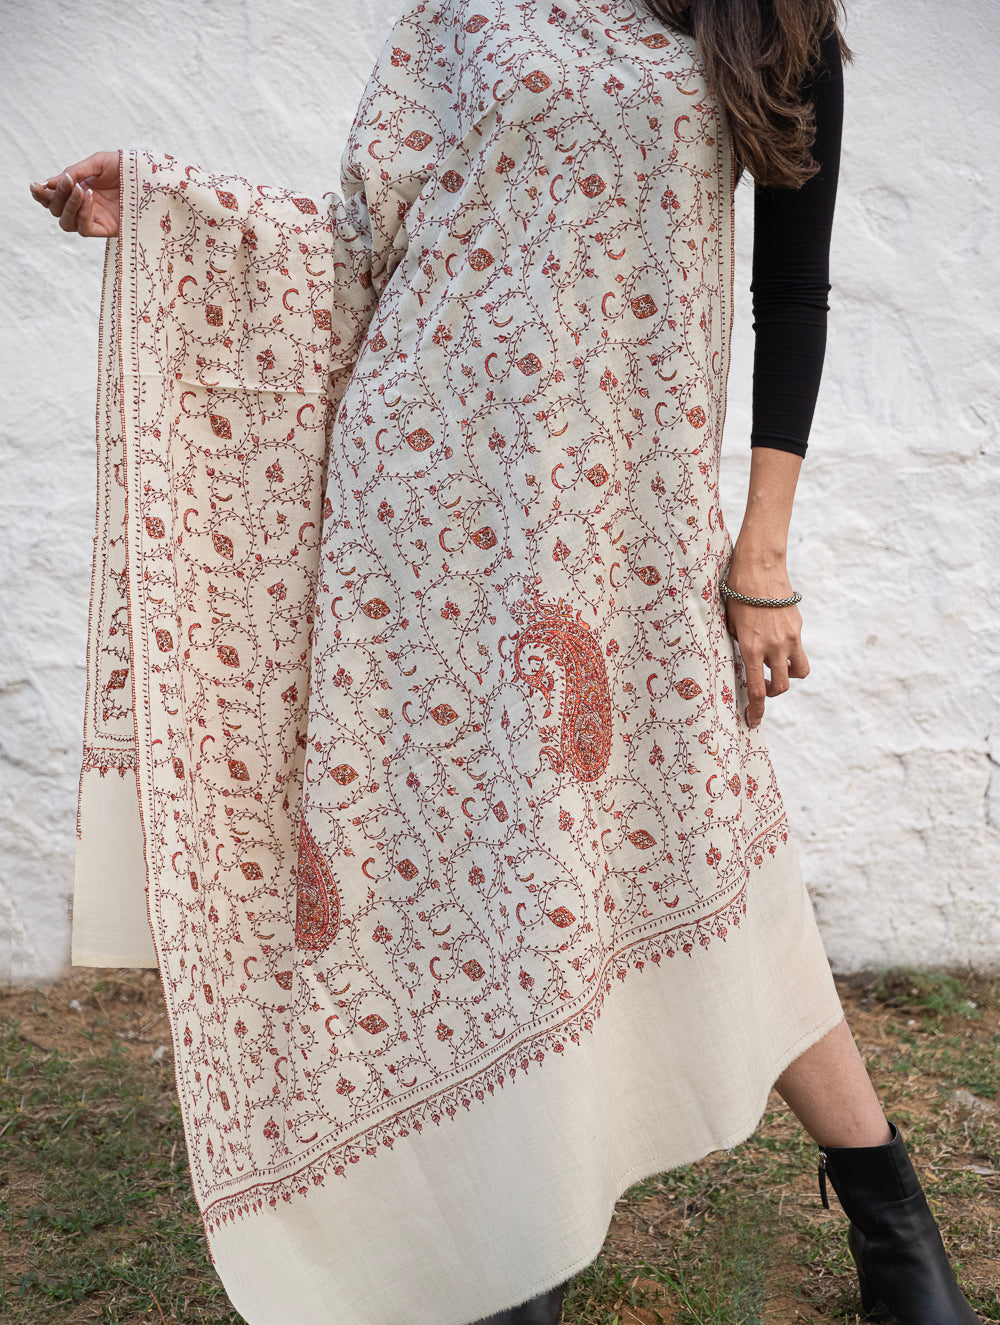 Load image into Gallery viewer, Exclusive, Fine Hand Embroidered Kashmiri Shawl - Cream &amp; Red Paisley  